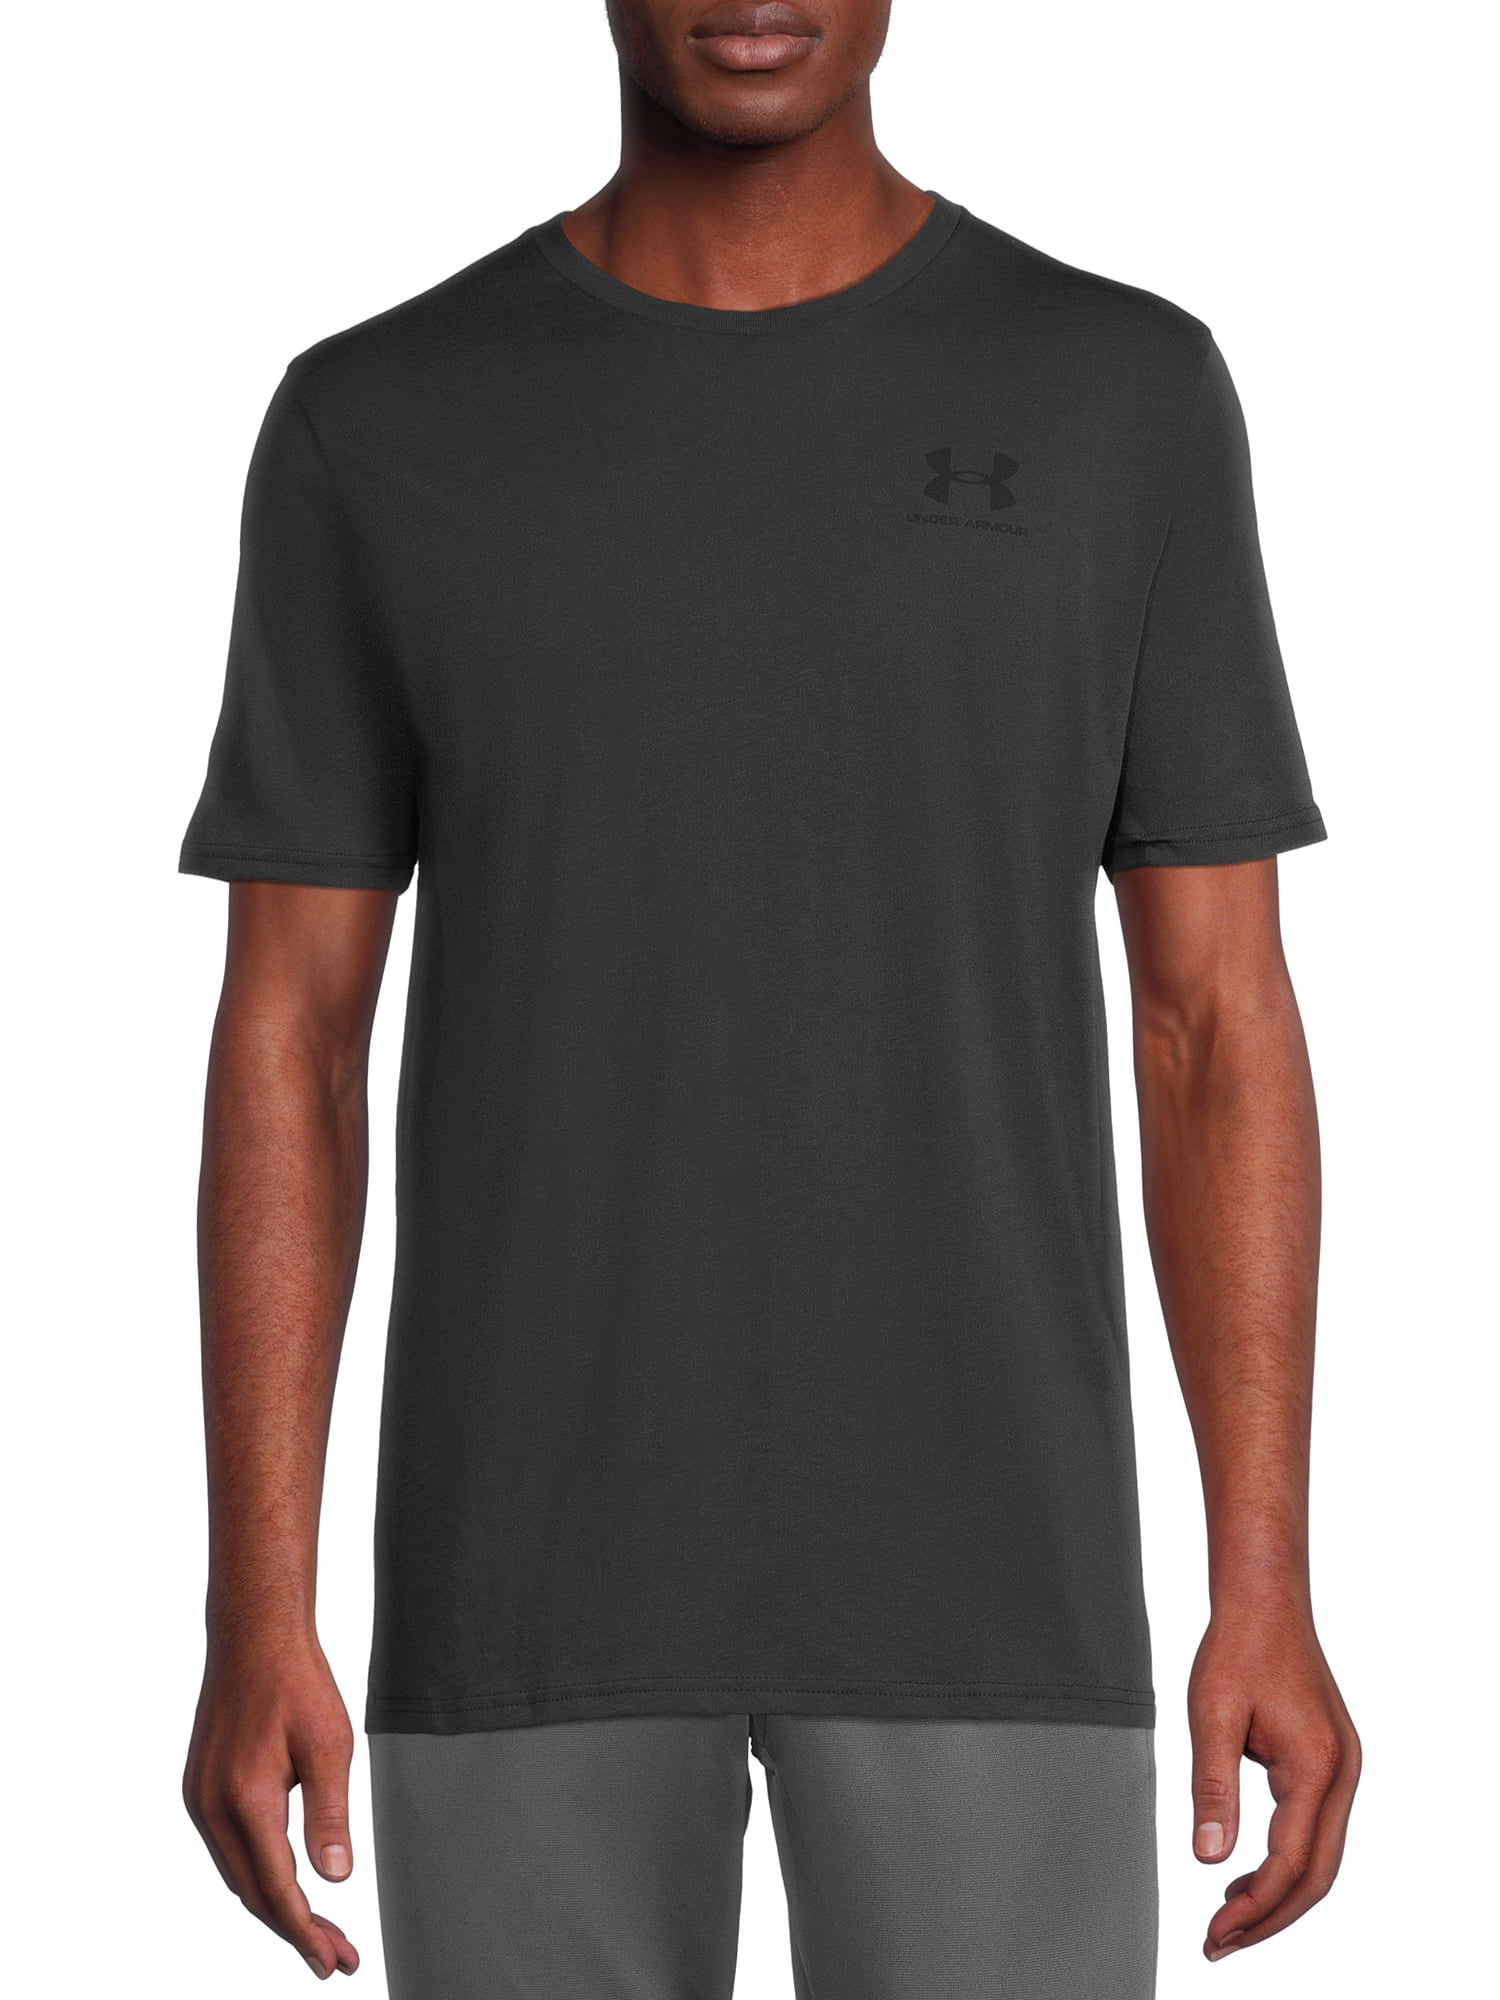 Under Armour Men's and Big Men's UA Sportstyle Left Chest Logo T-shirt,  Sizes up to 2XL